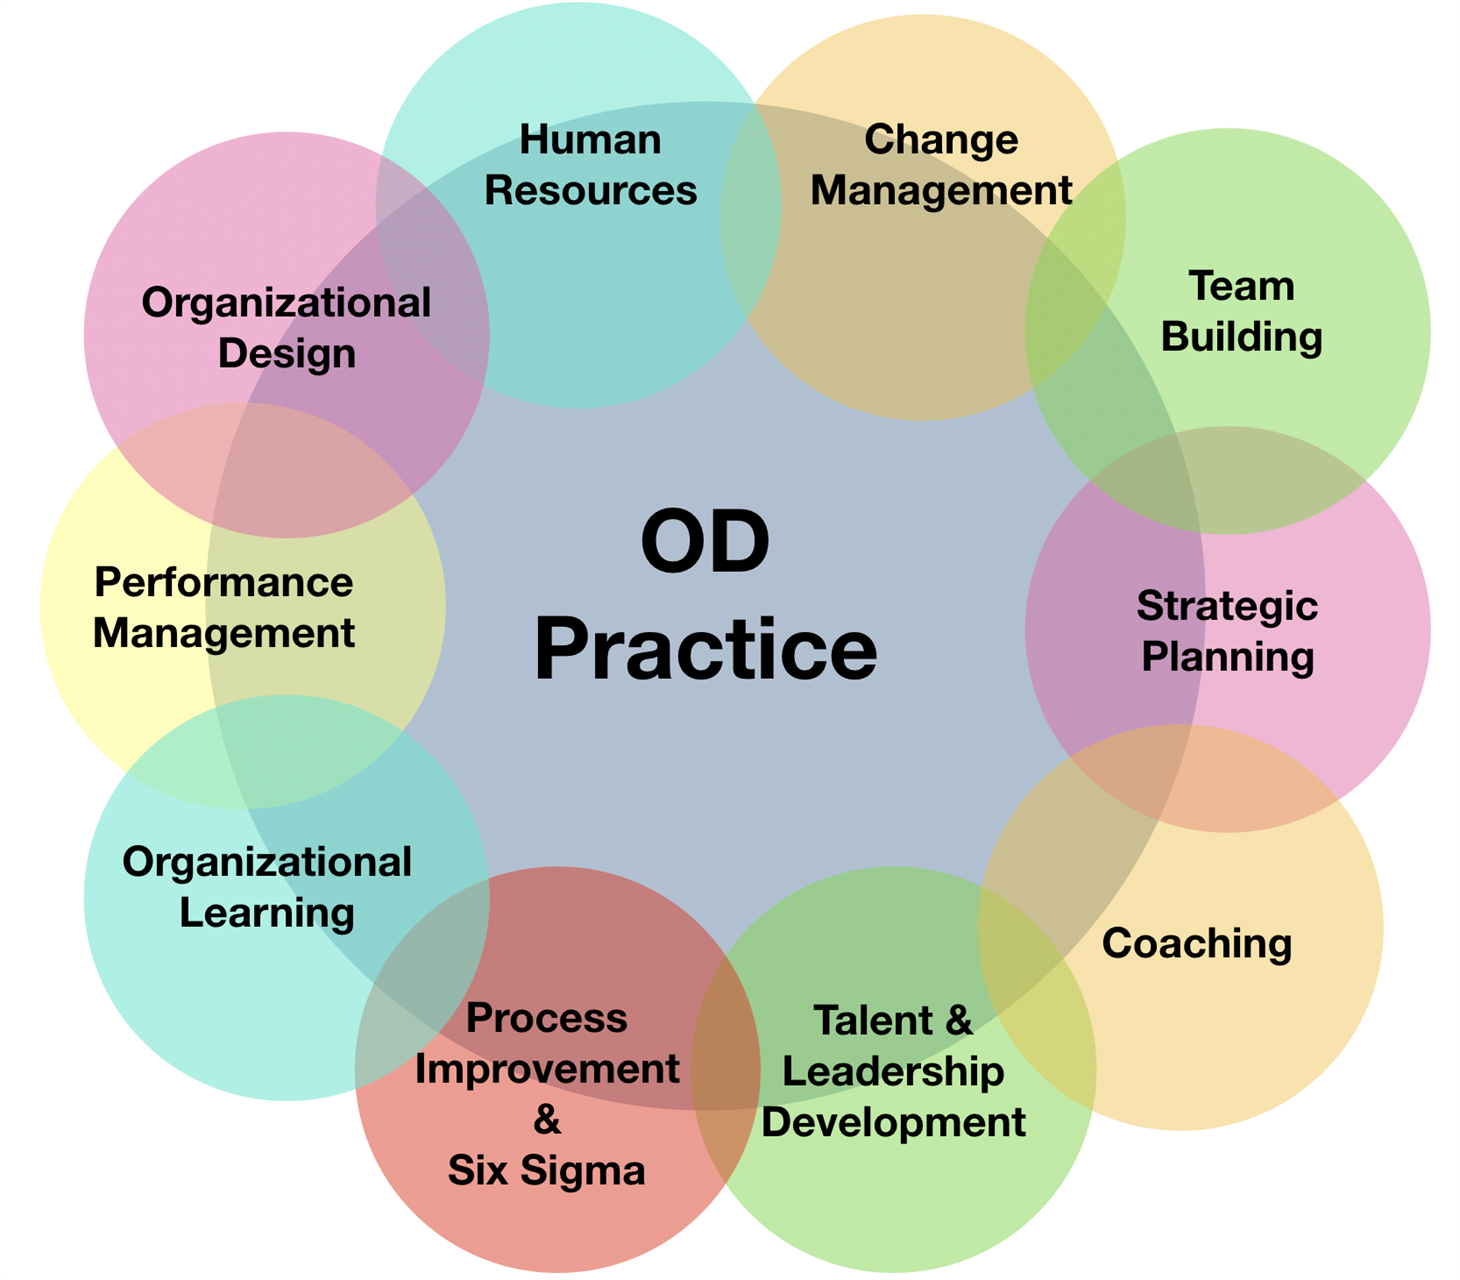 Common OD Practice Bubble Map Image